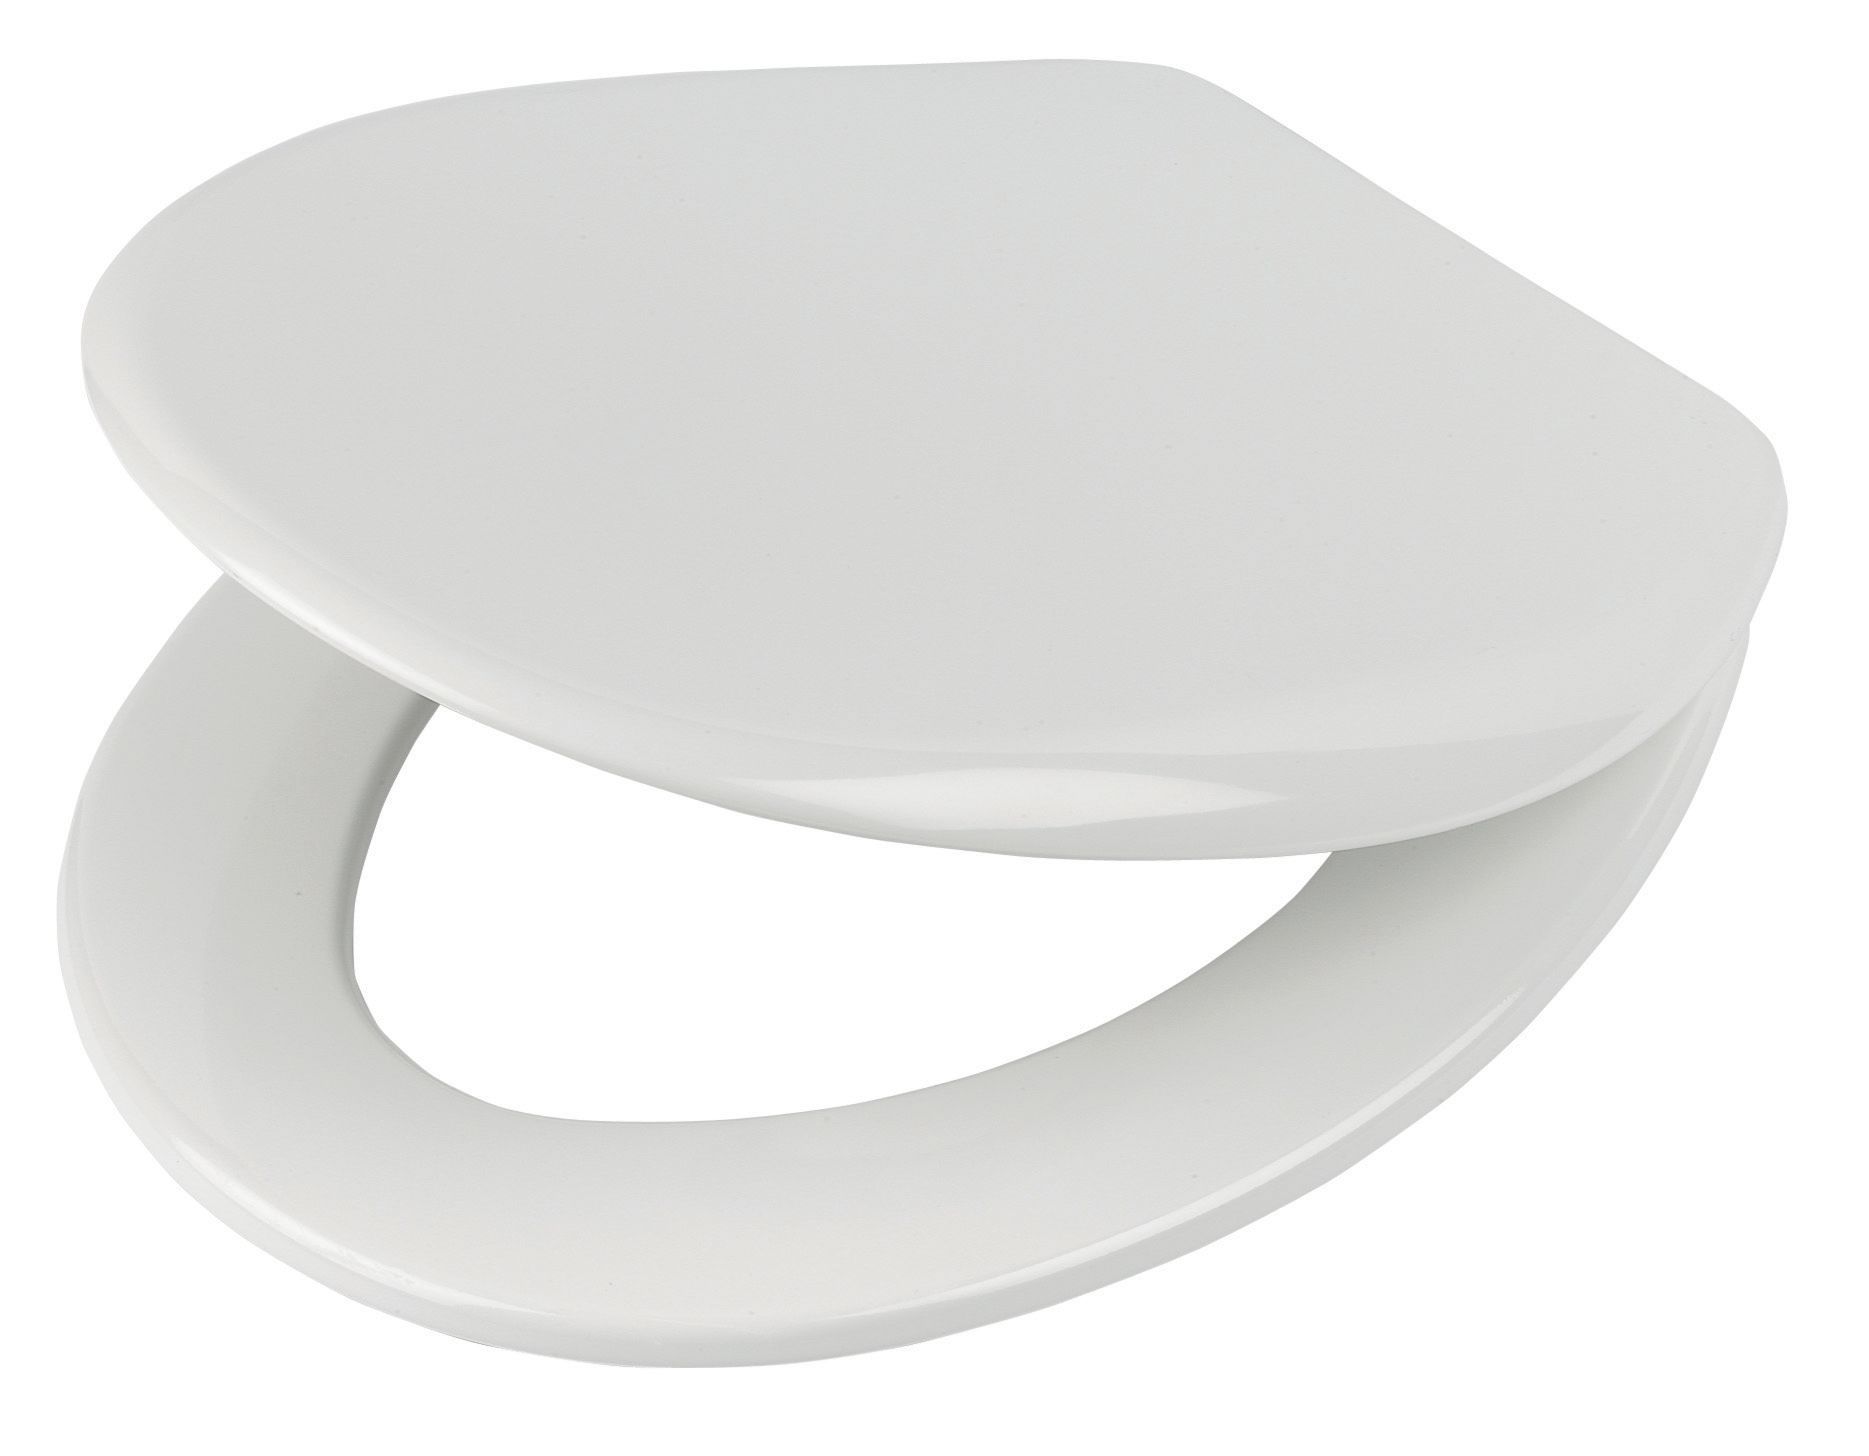 Ideal Standard Space White Standard close Toilet seat | Departments